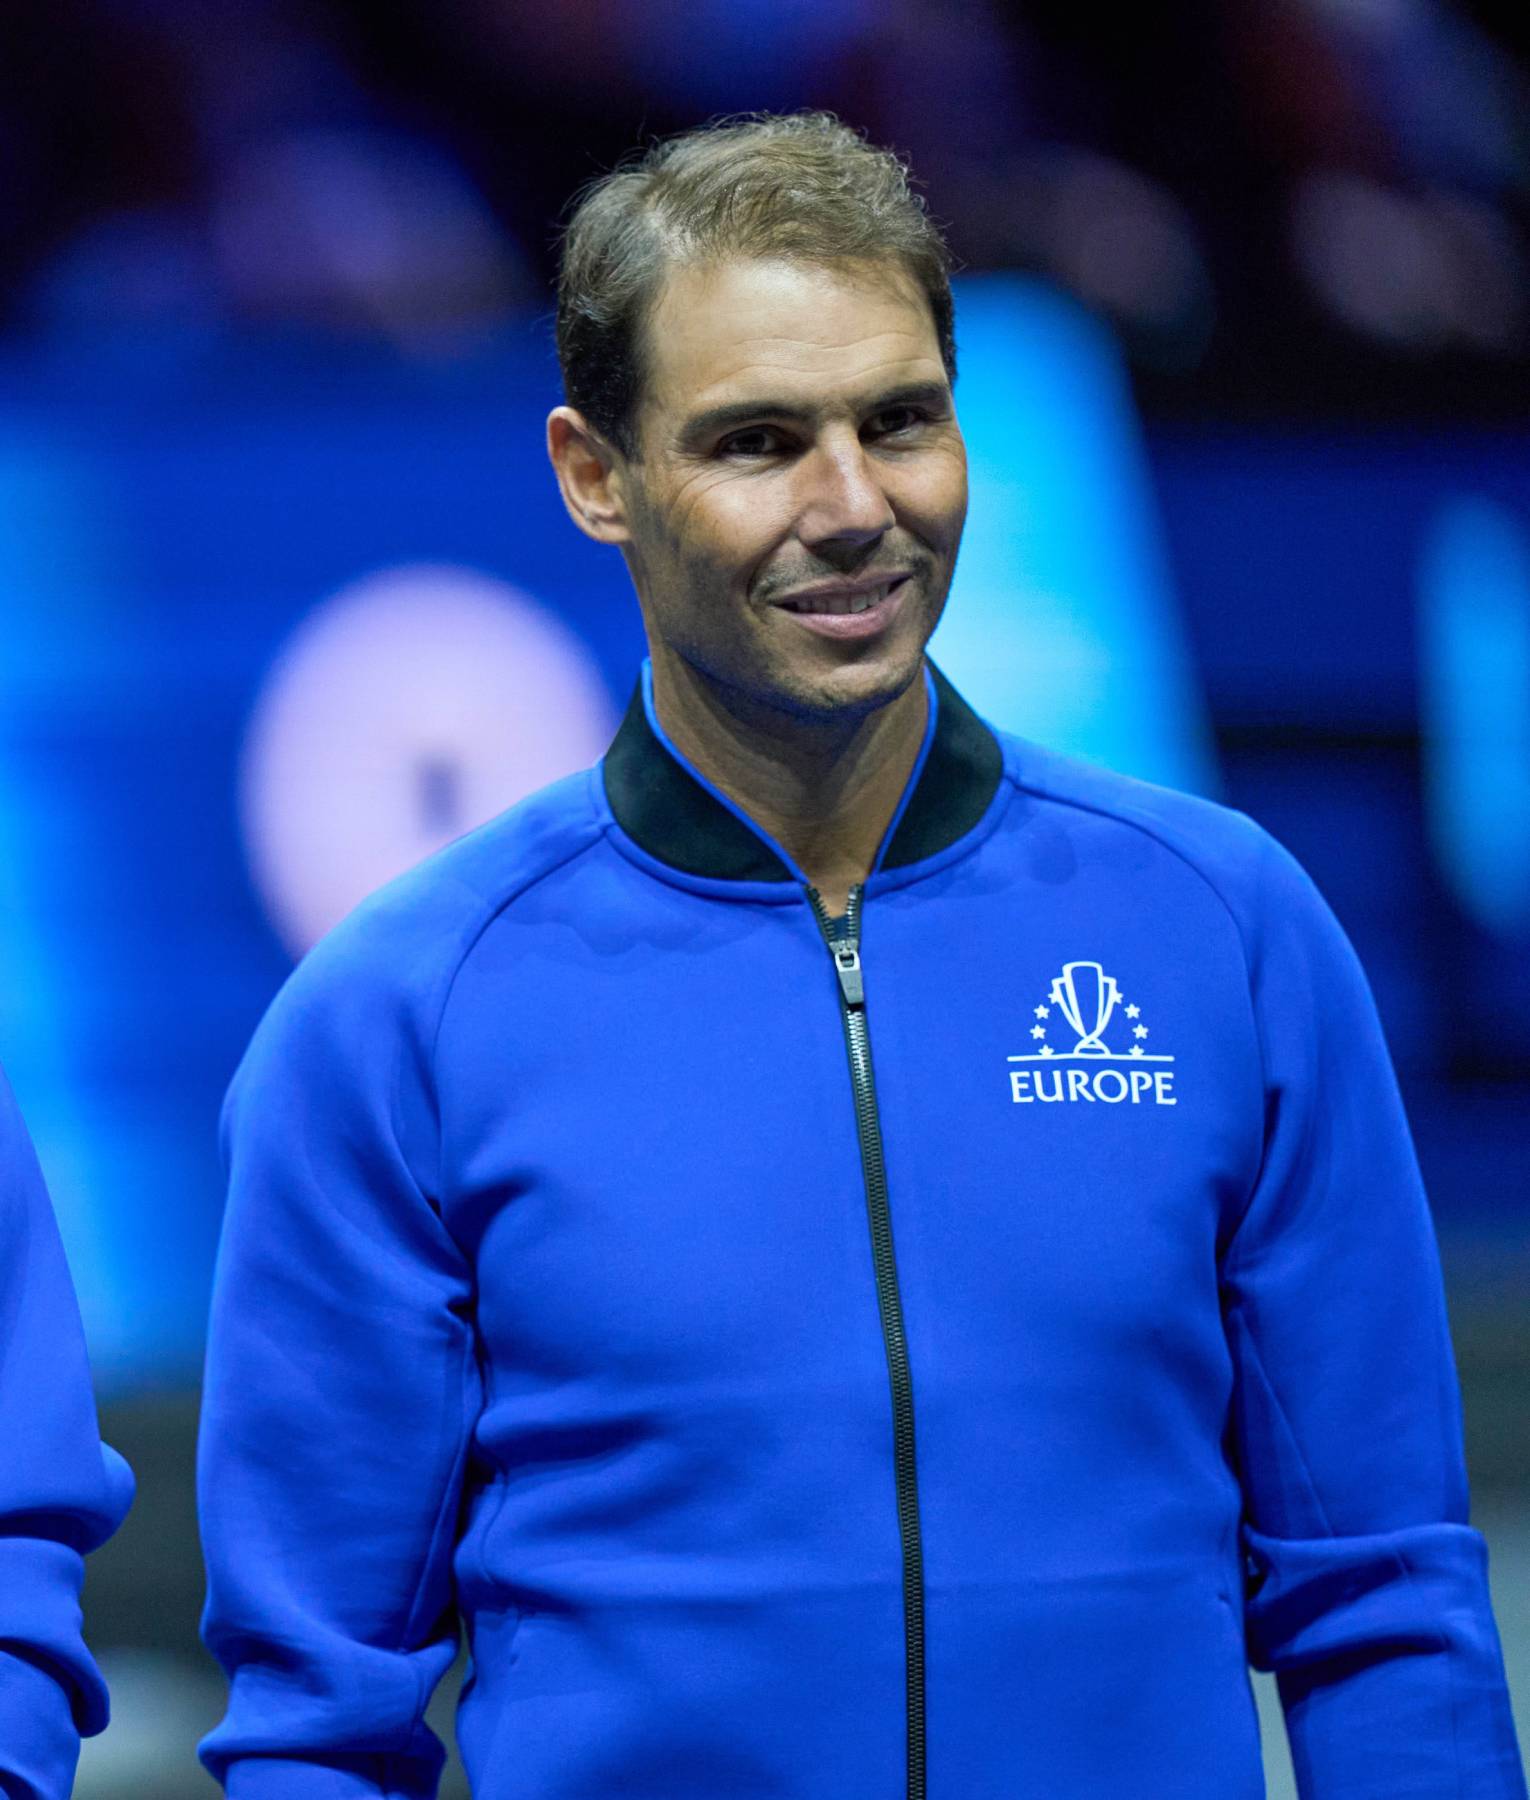 Europe Laver Cup Blue Jacket (2)